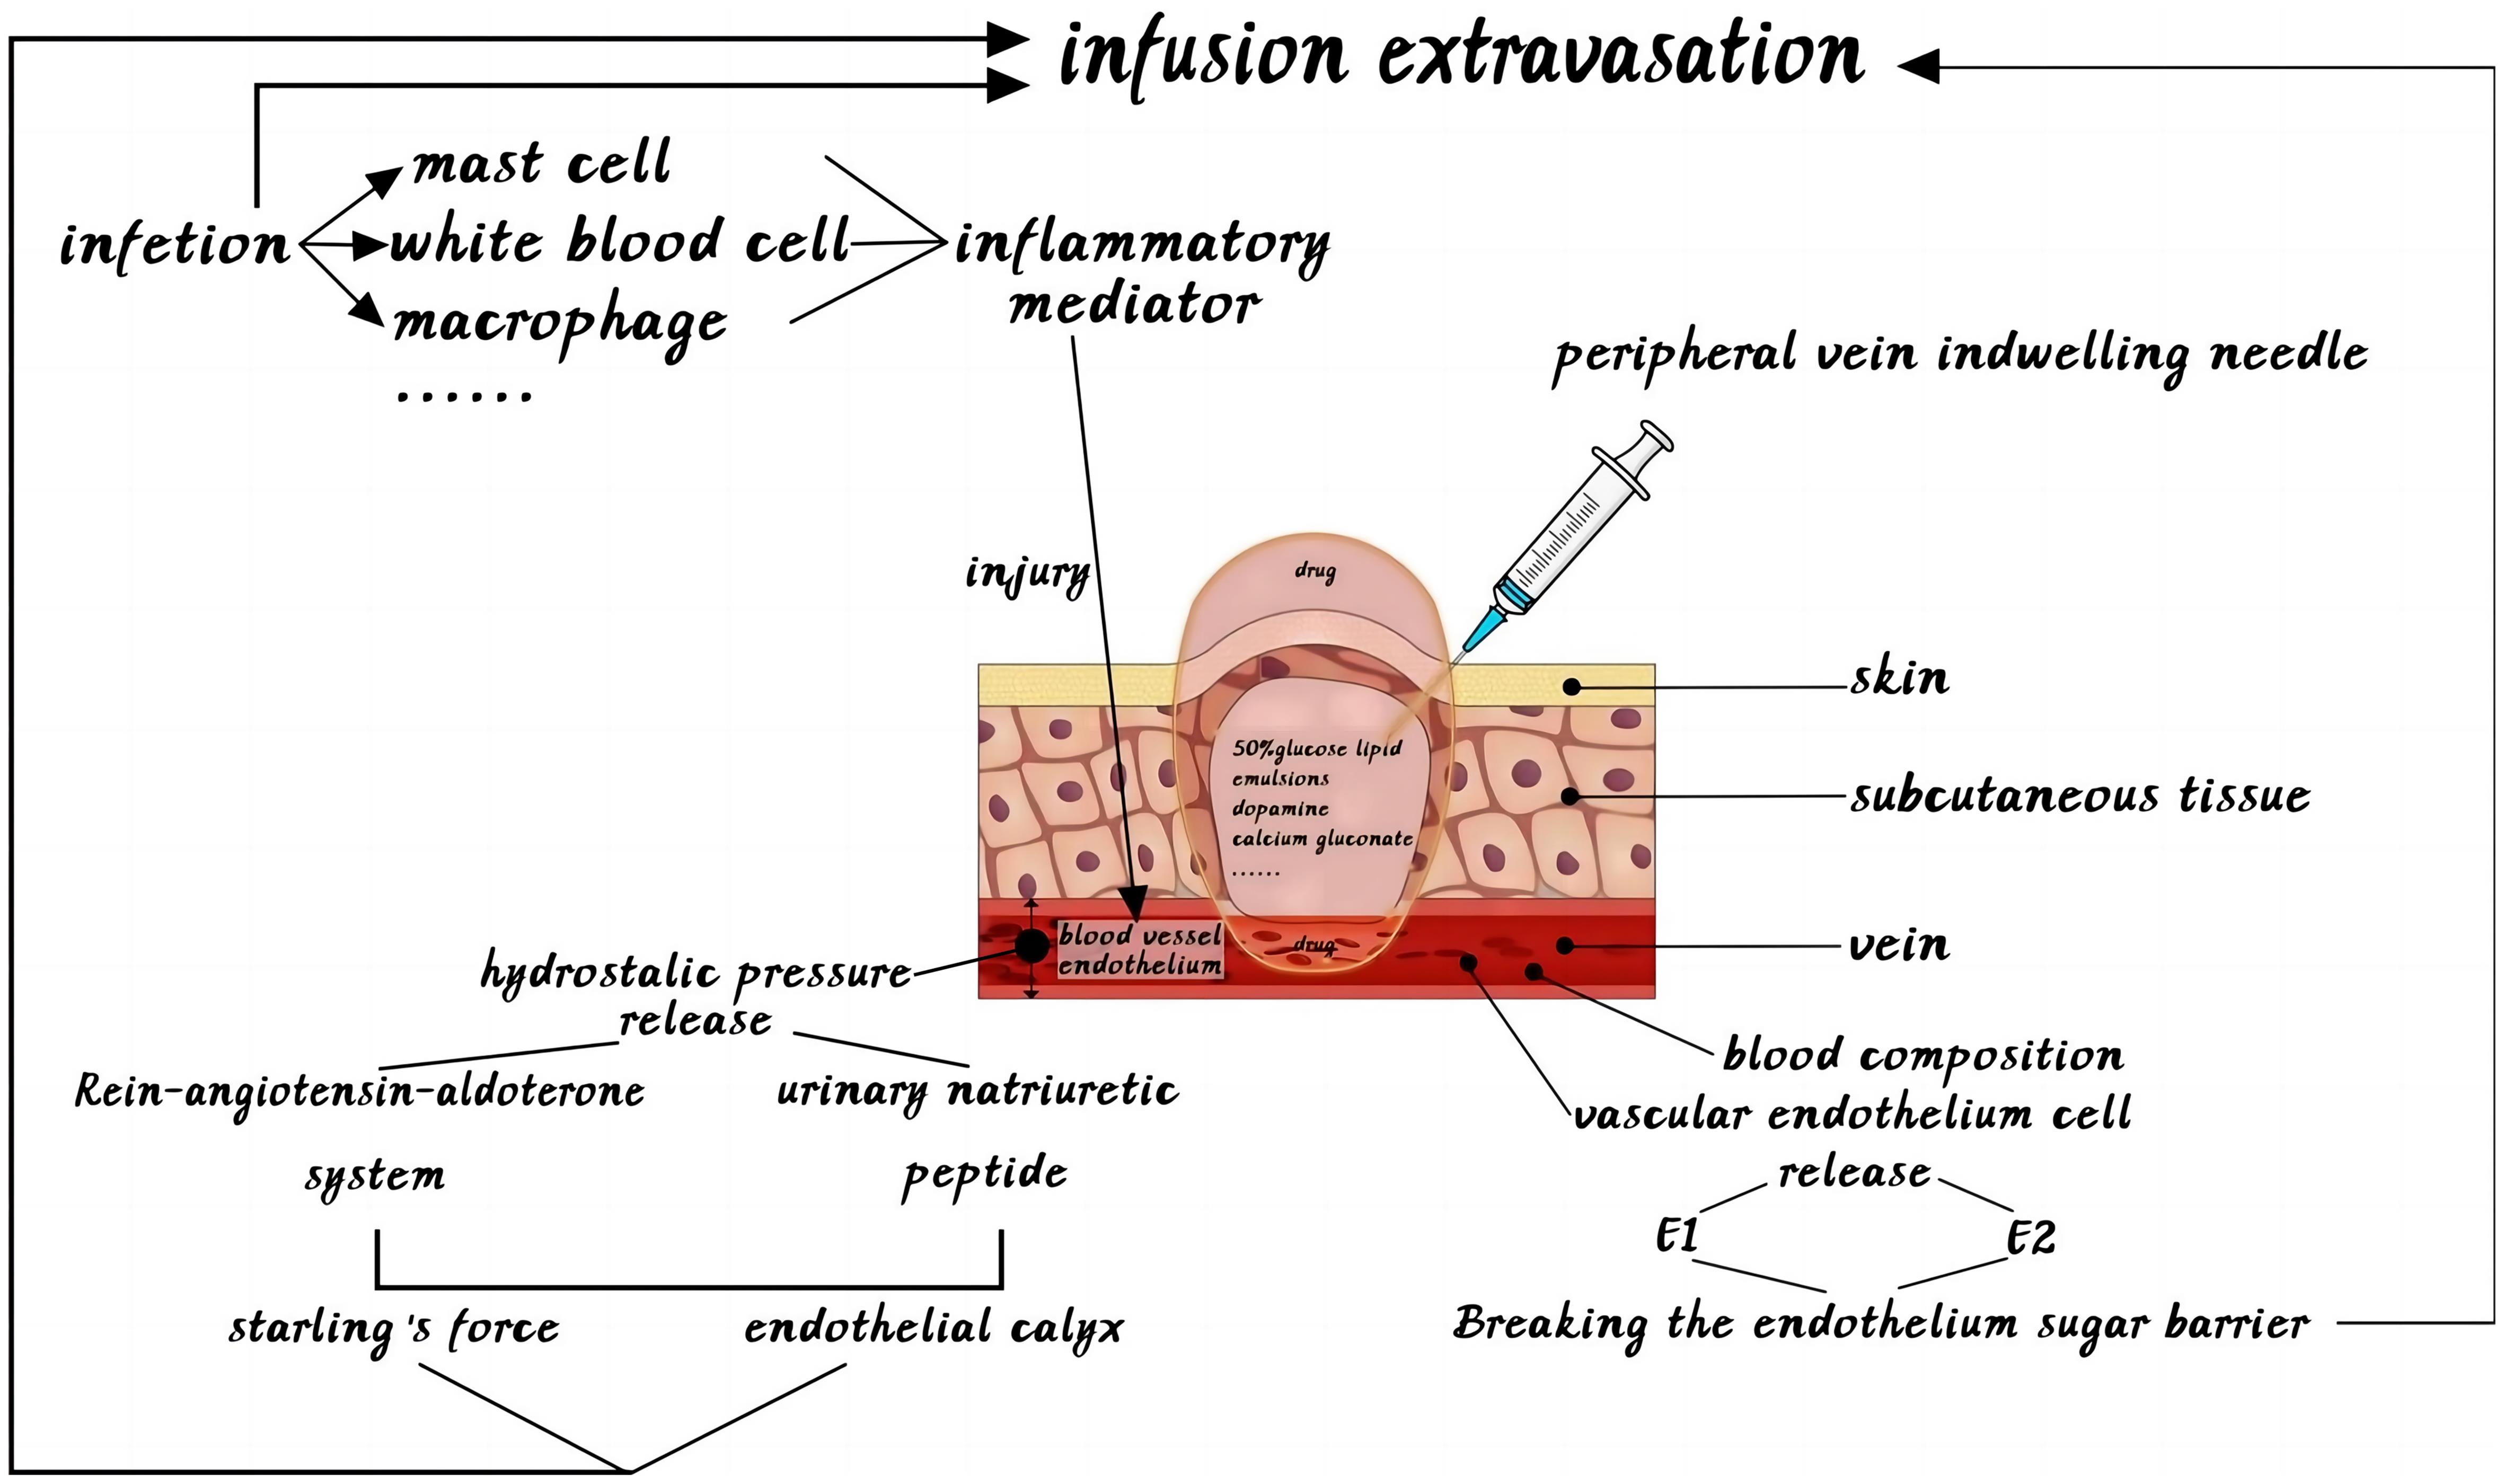 The mechanism of infusion extravasation.